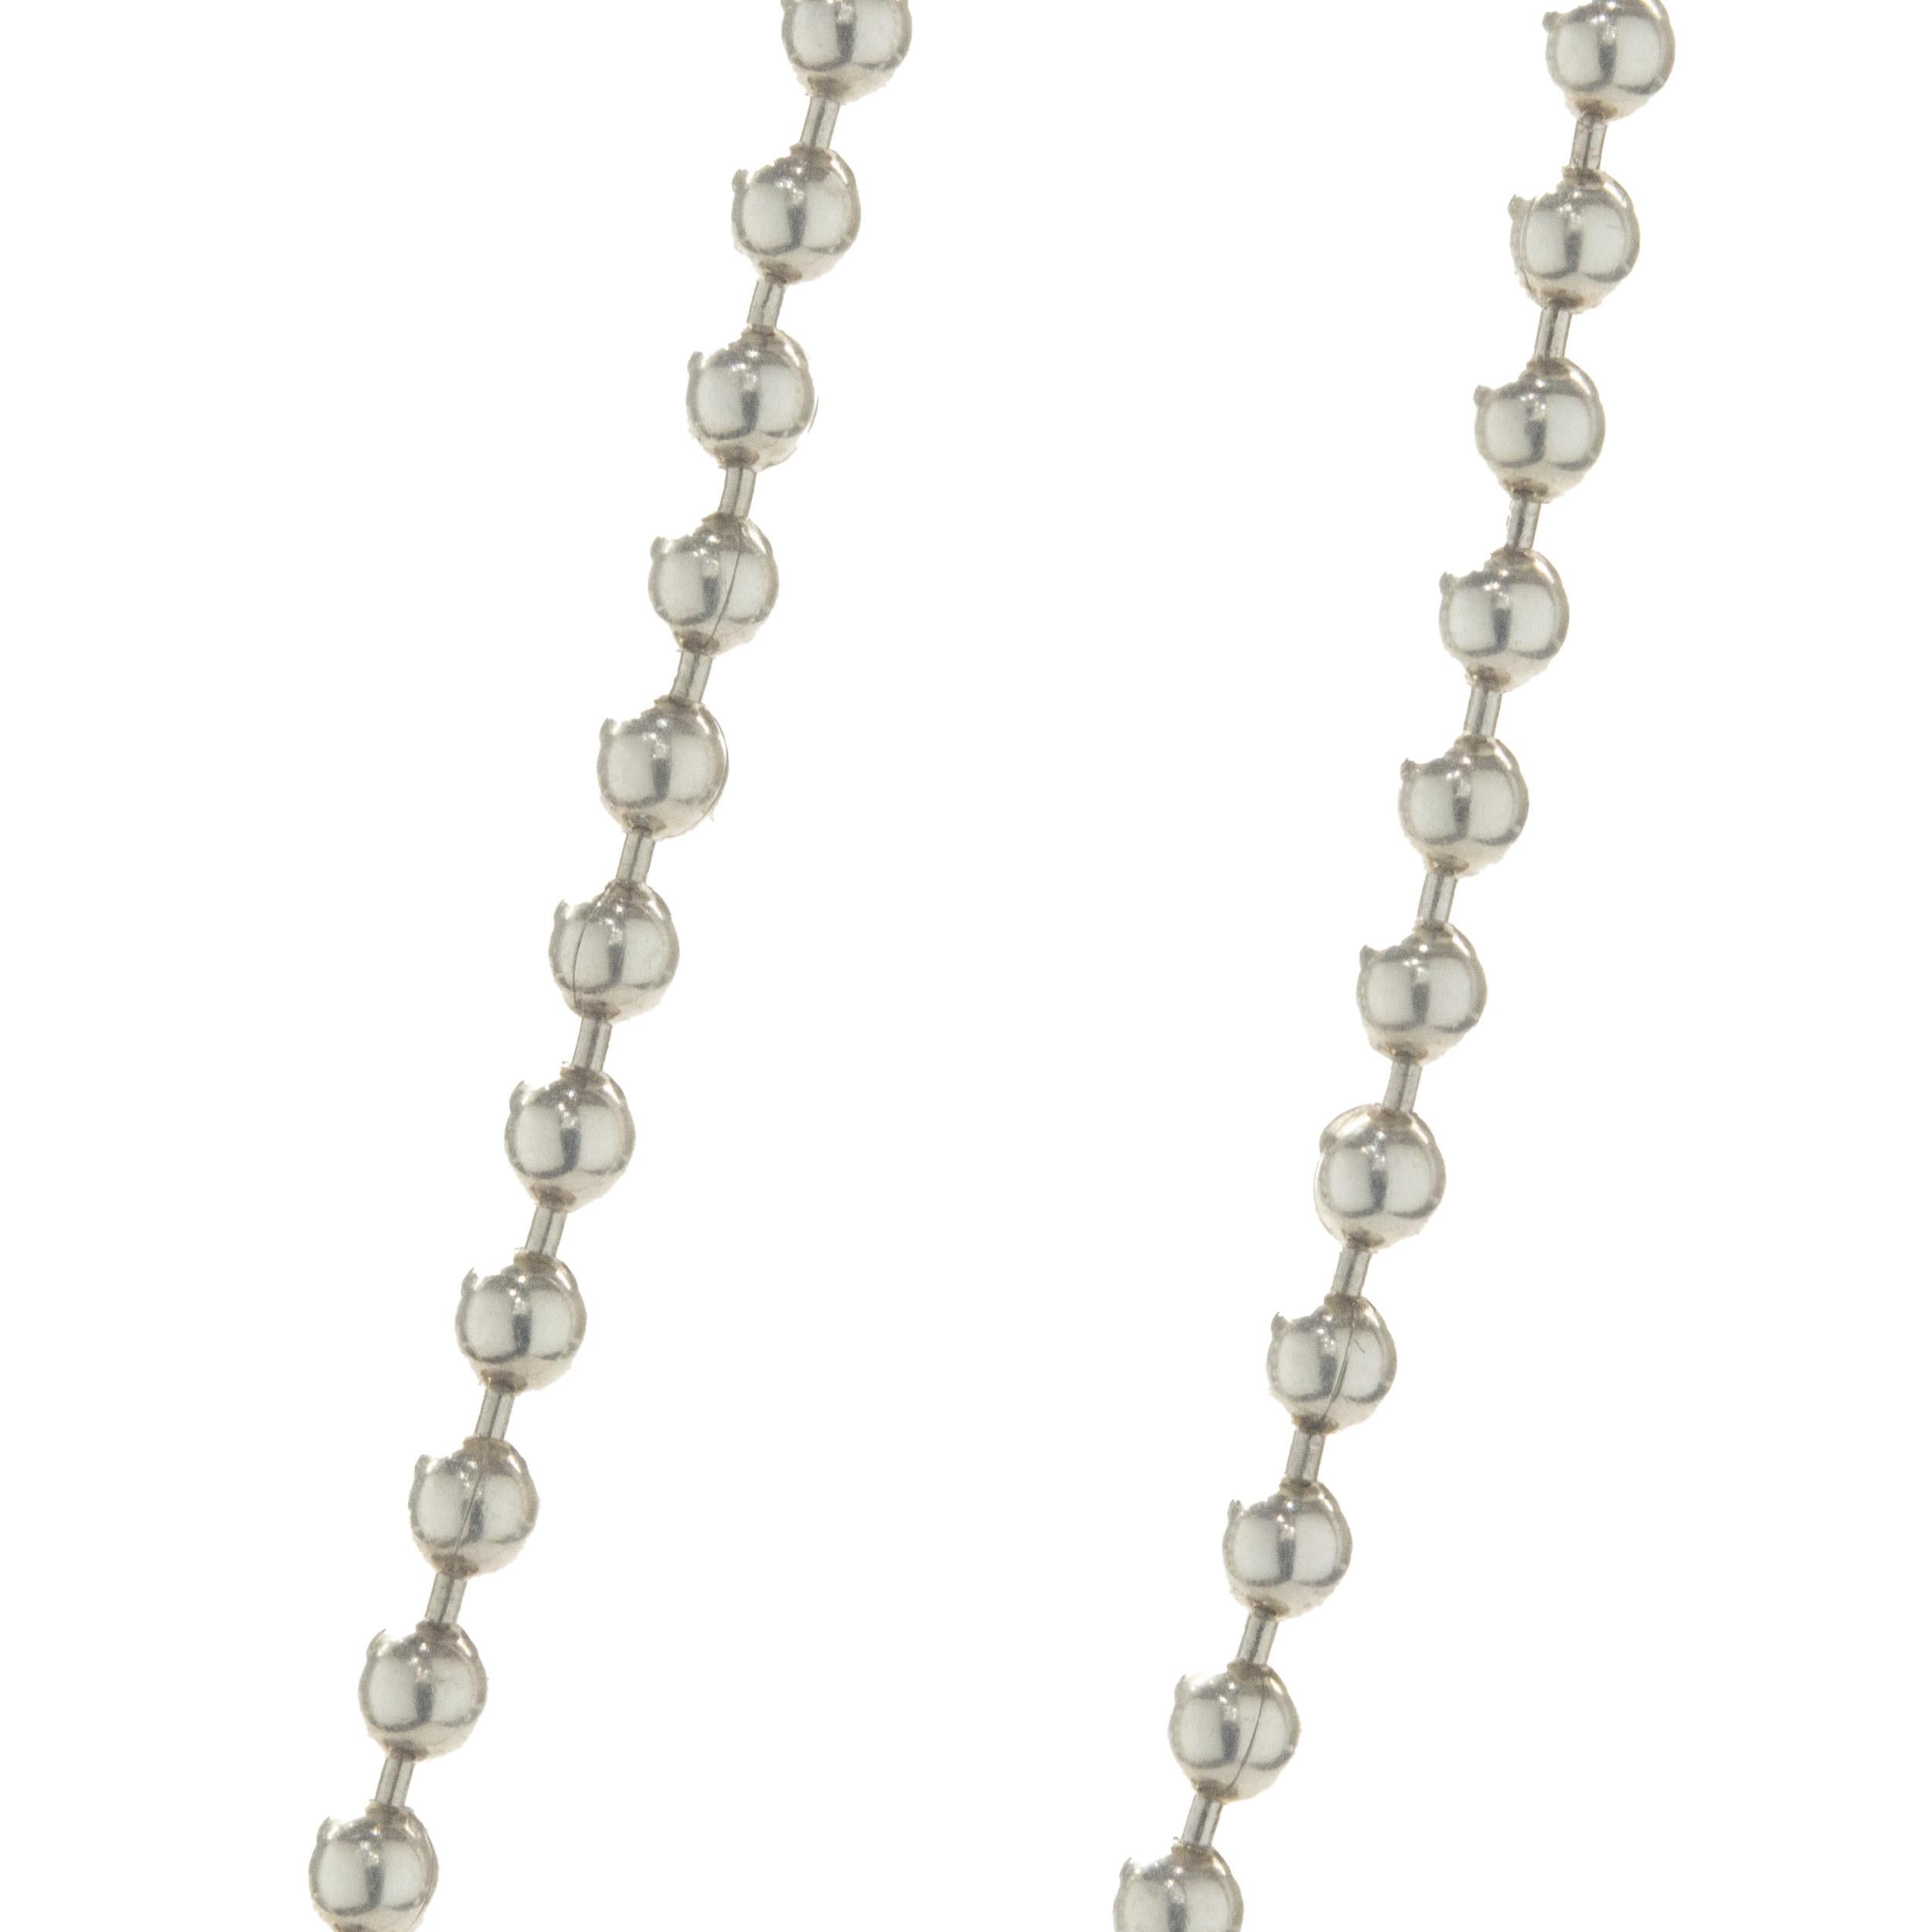 Designer: Tiffany & Co. 
Material: sterling silver
Dimensions: necklace measures 32-inches
Weight: 28.41 grams